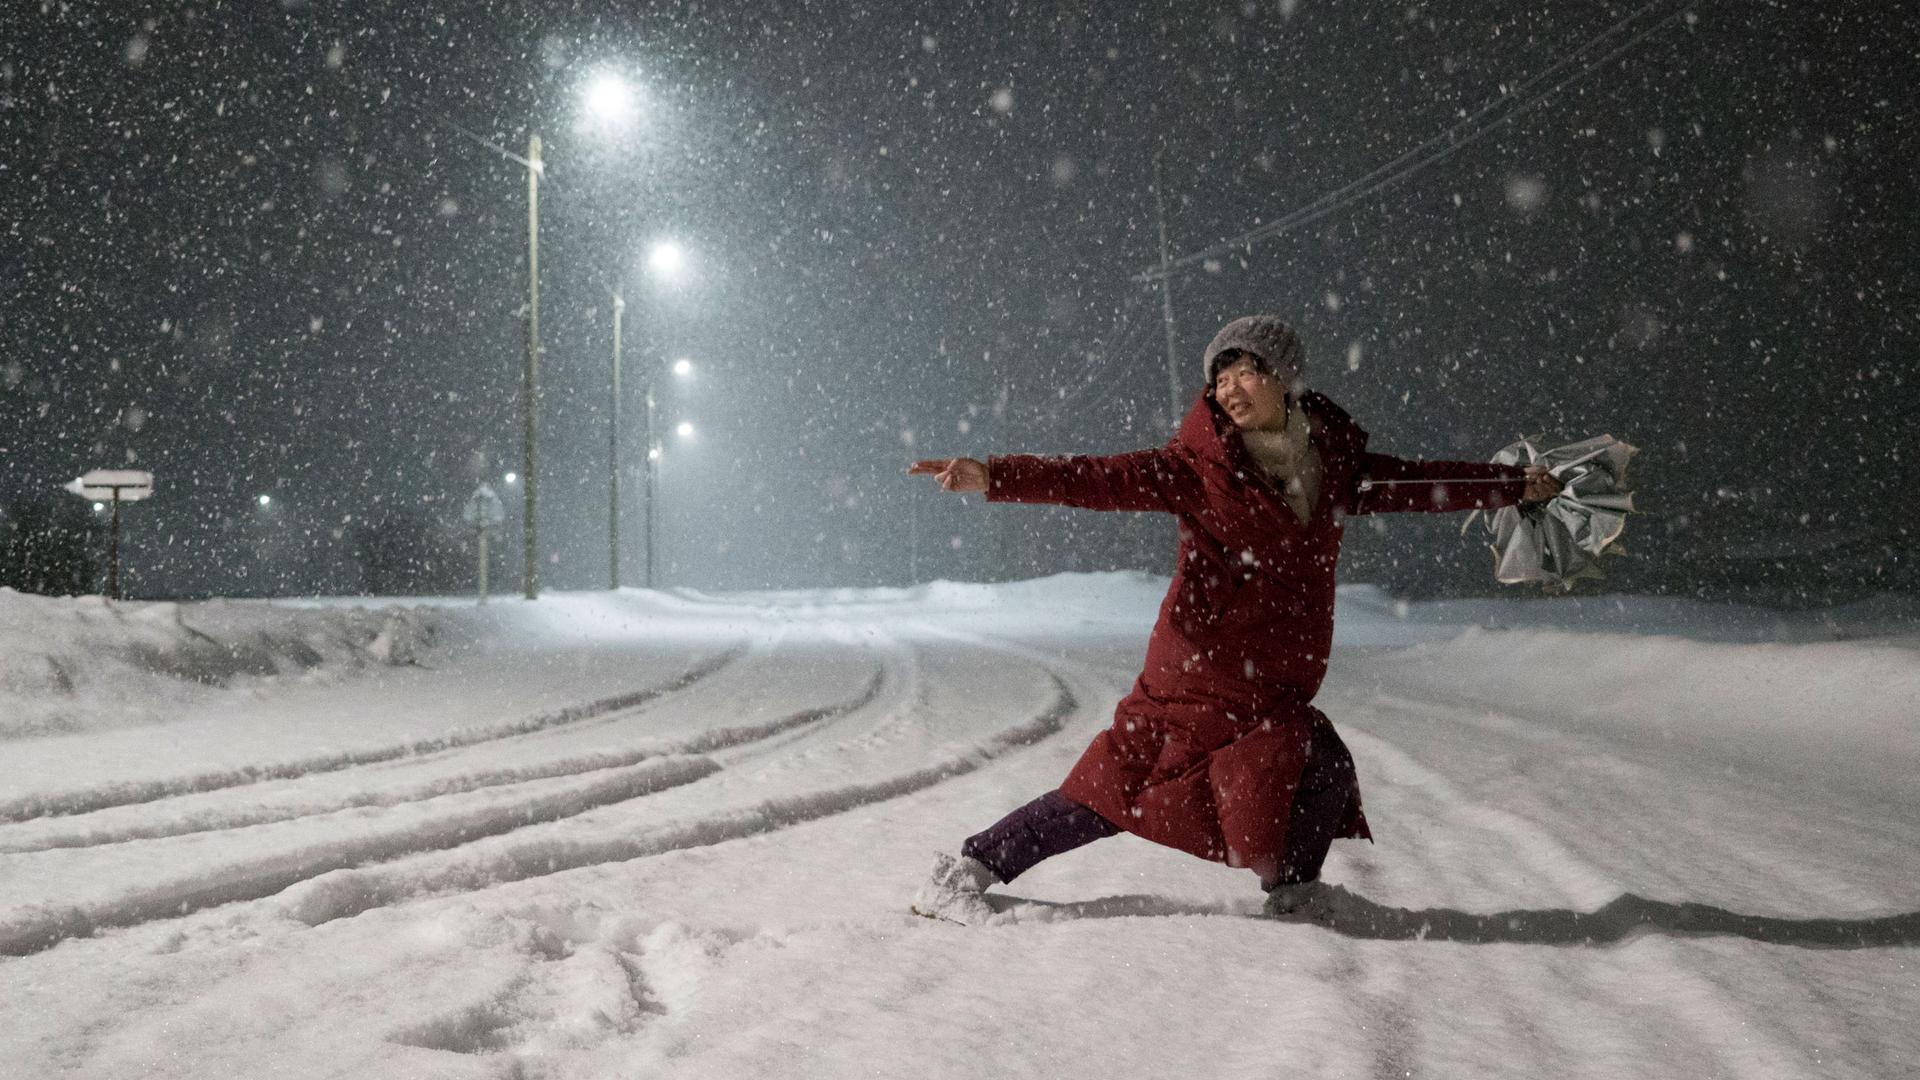 A woman in a red jacket is shown dancing in the street with snow falling all around her.